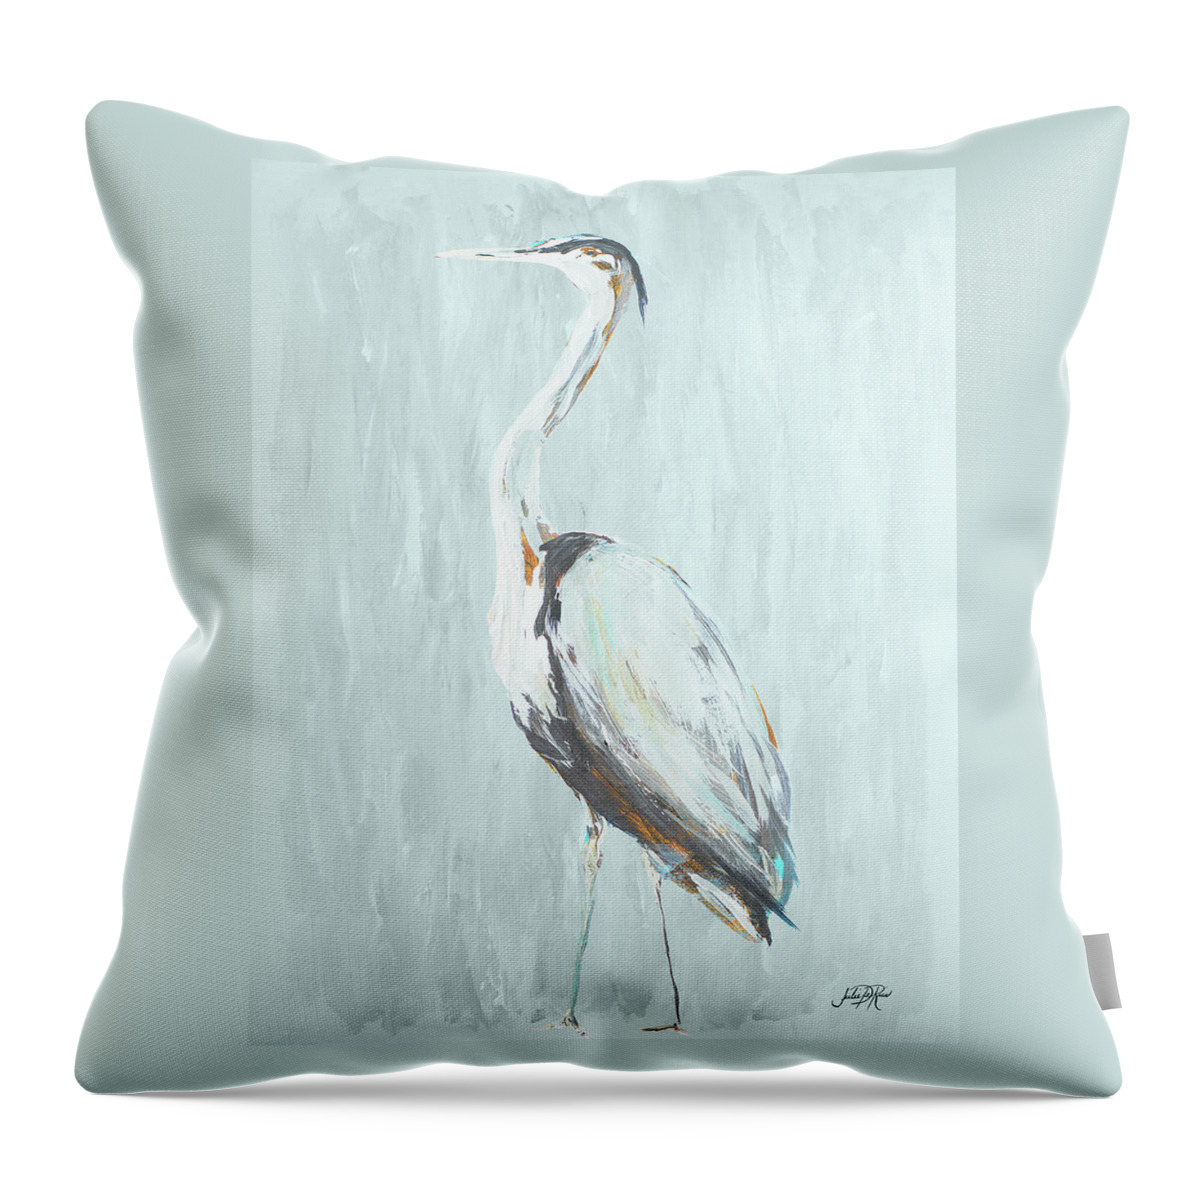 Among Throw Pillow featuring the painting Among The Blue I by South Social D